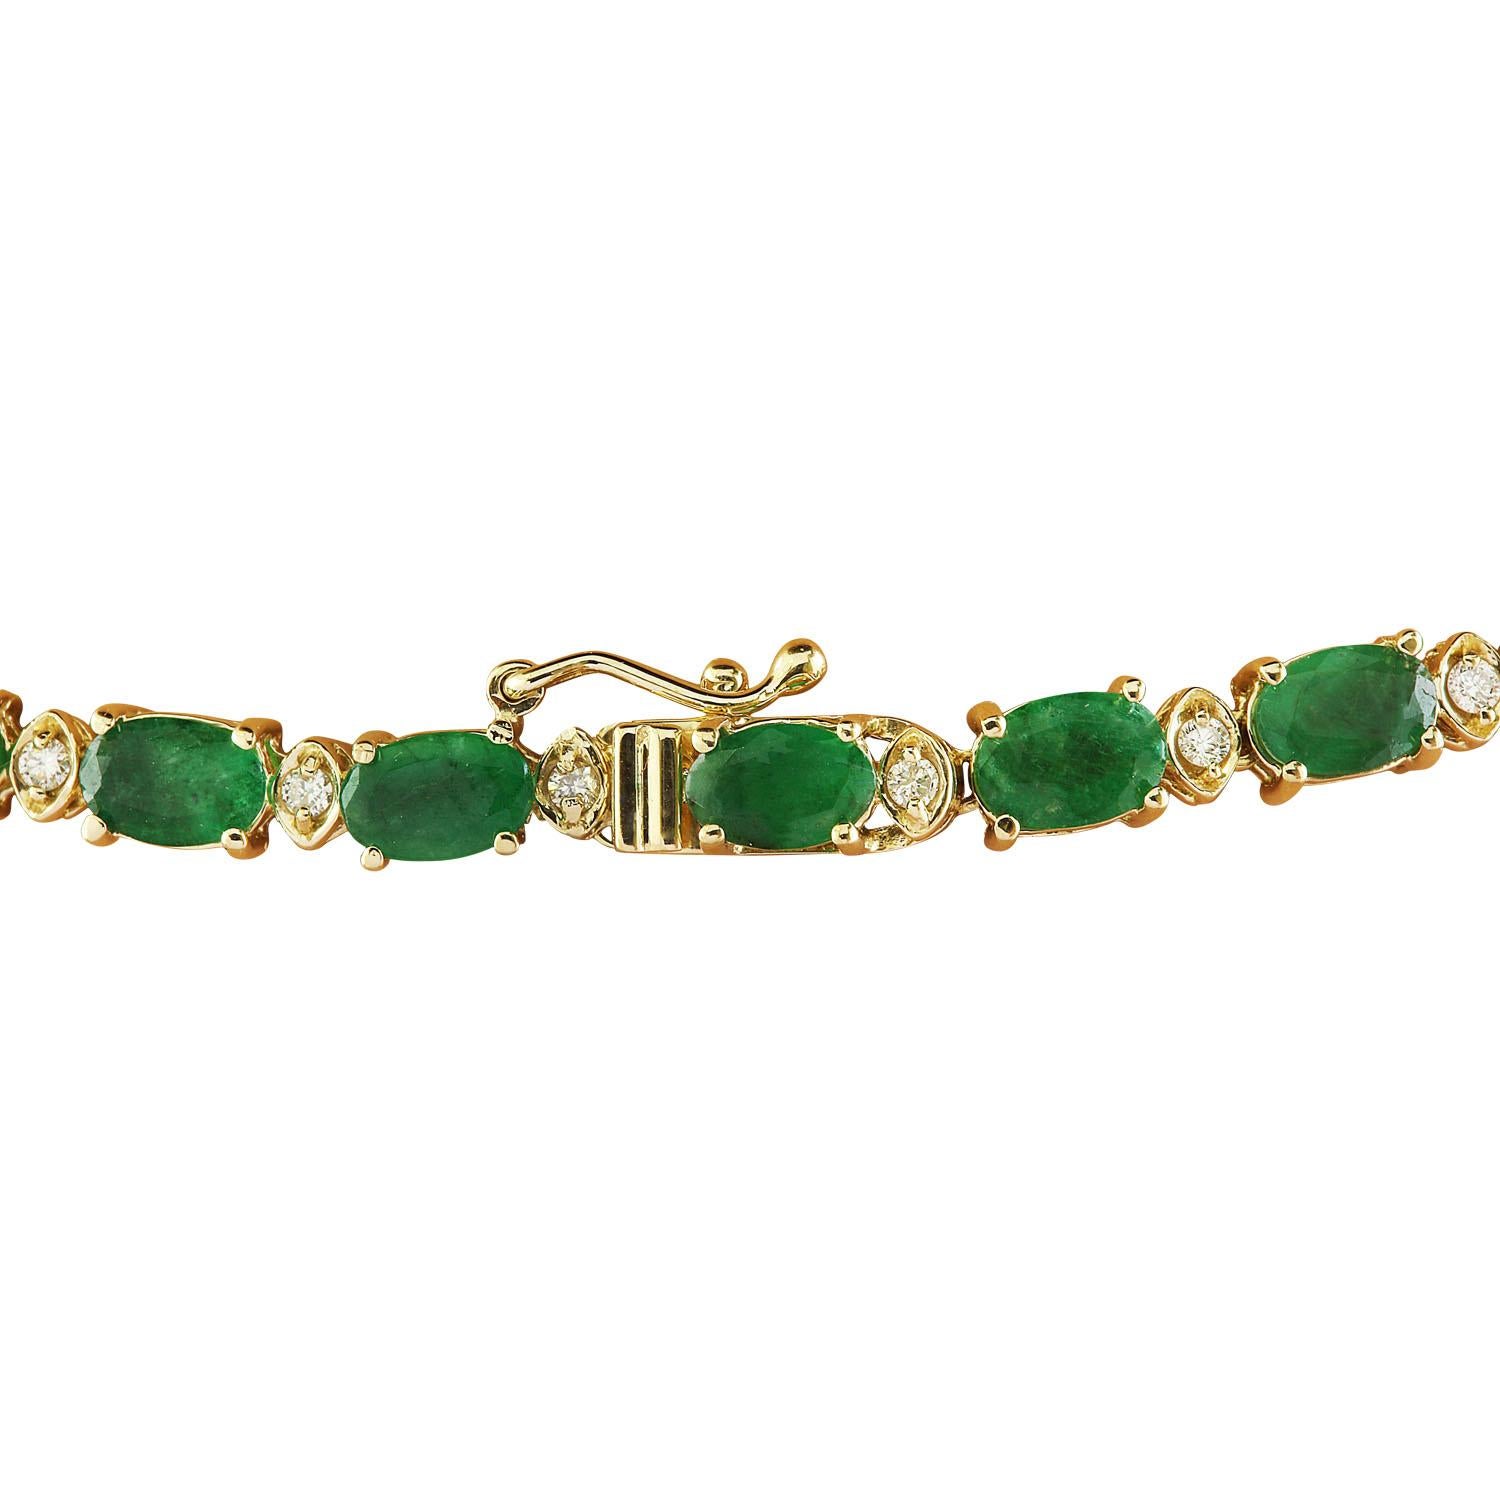 31.60 Carat Natural Emerald 14 Karat Solid Yellow Gold Diamond Necklace
Stamped: 14K
Total Necklace Weight: 25 Grams
Necklace Length: 17 Inches
Center Emerald Weight: 2.80 Carat (10.00x8.00 Millimeters)
Side Emerald Weight: 26.00 Carat (6.00x4.00